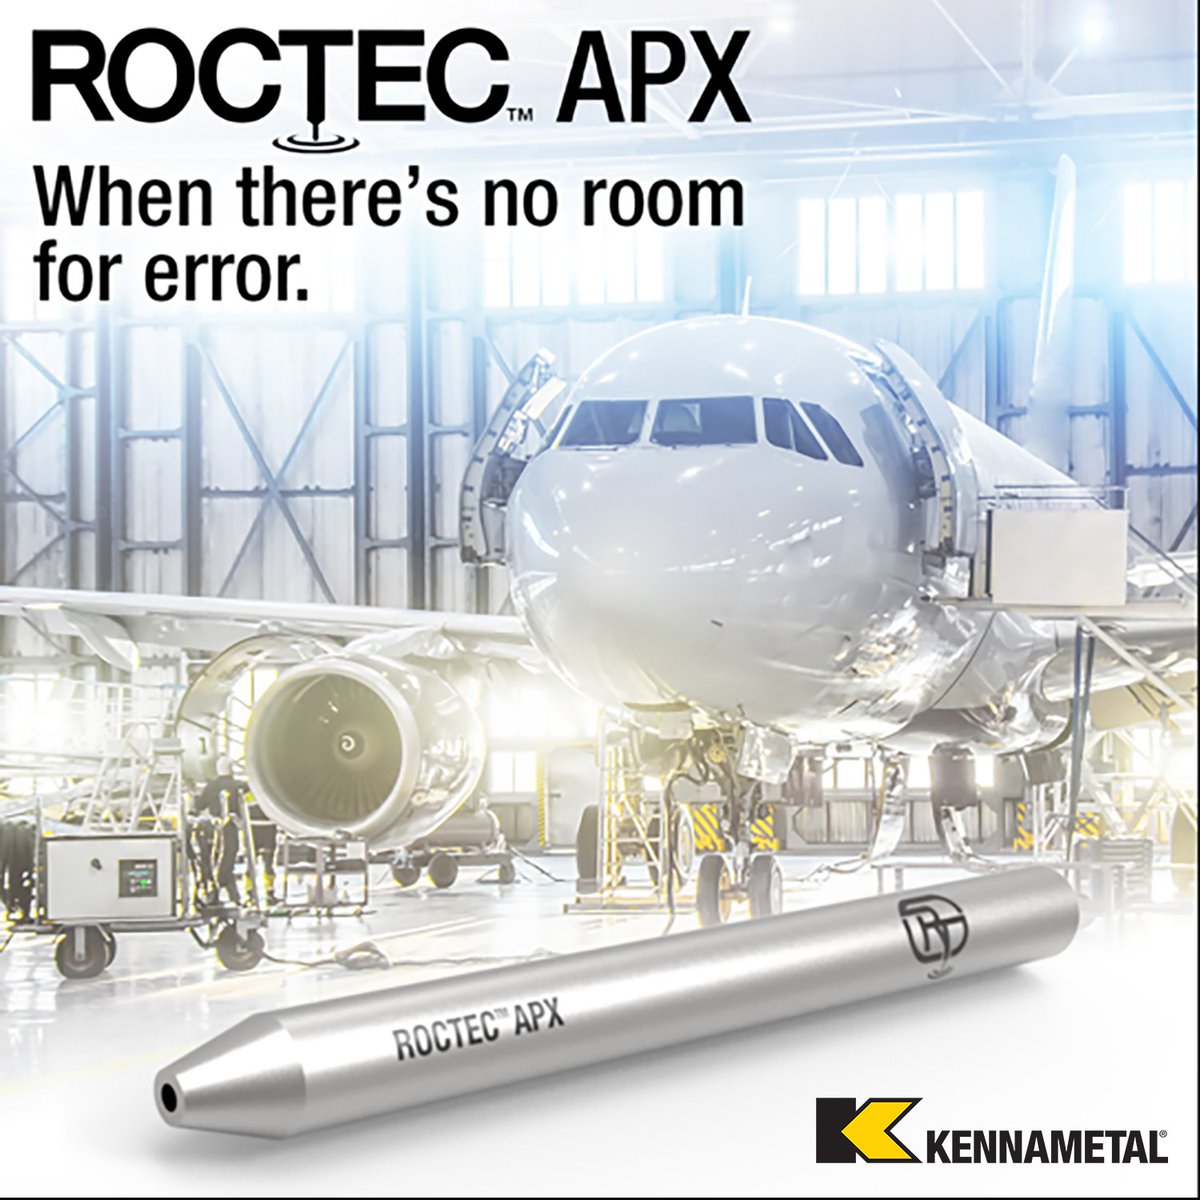 Experience the new standard in #waterjet machining! Roctec™ APX extends abrasive nozzle life as much as 20% over our industry-leading Roctec™ 500. When there's no room for error, Roctec APX is your answer. Learn more: okt.to/wDnBGA #PrecisionCutting #Aerospace